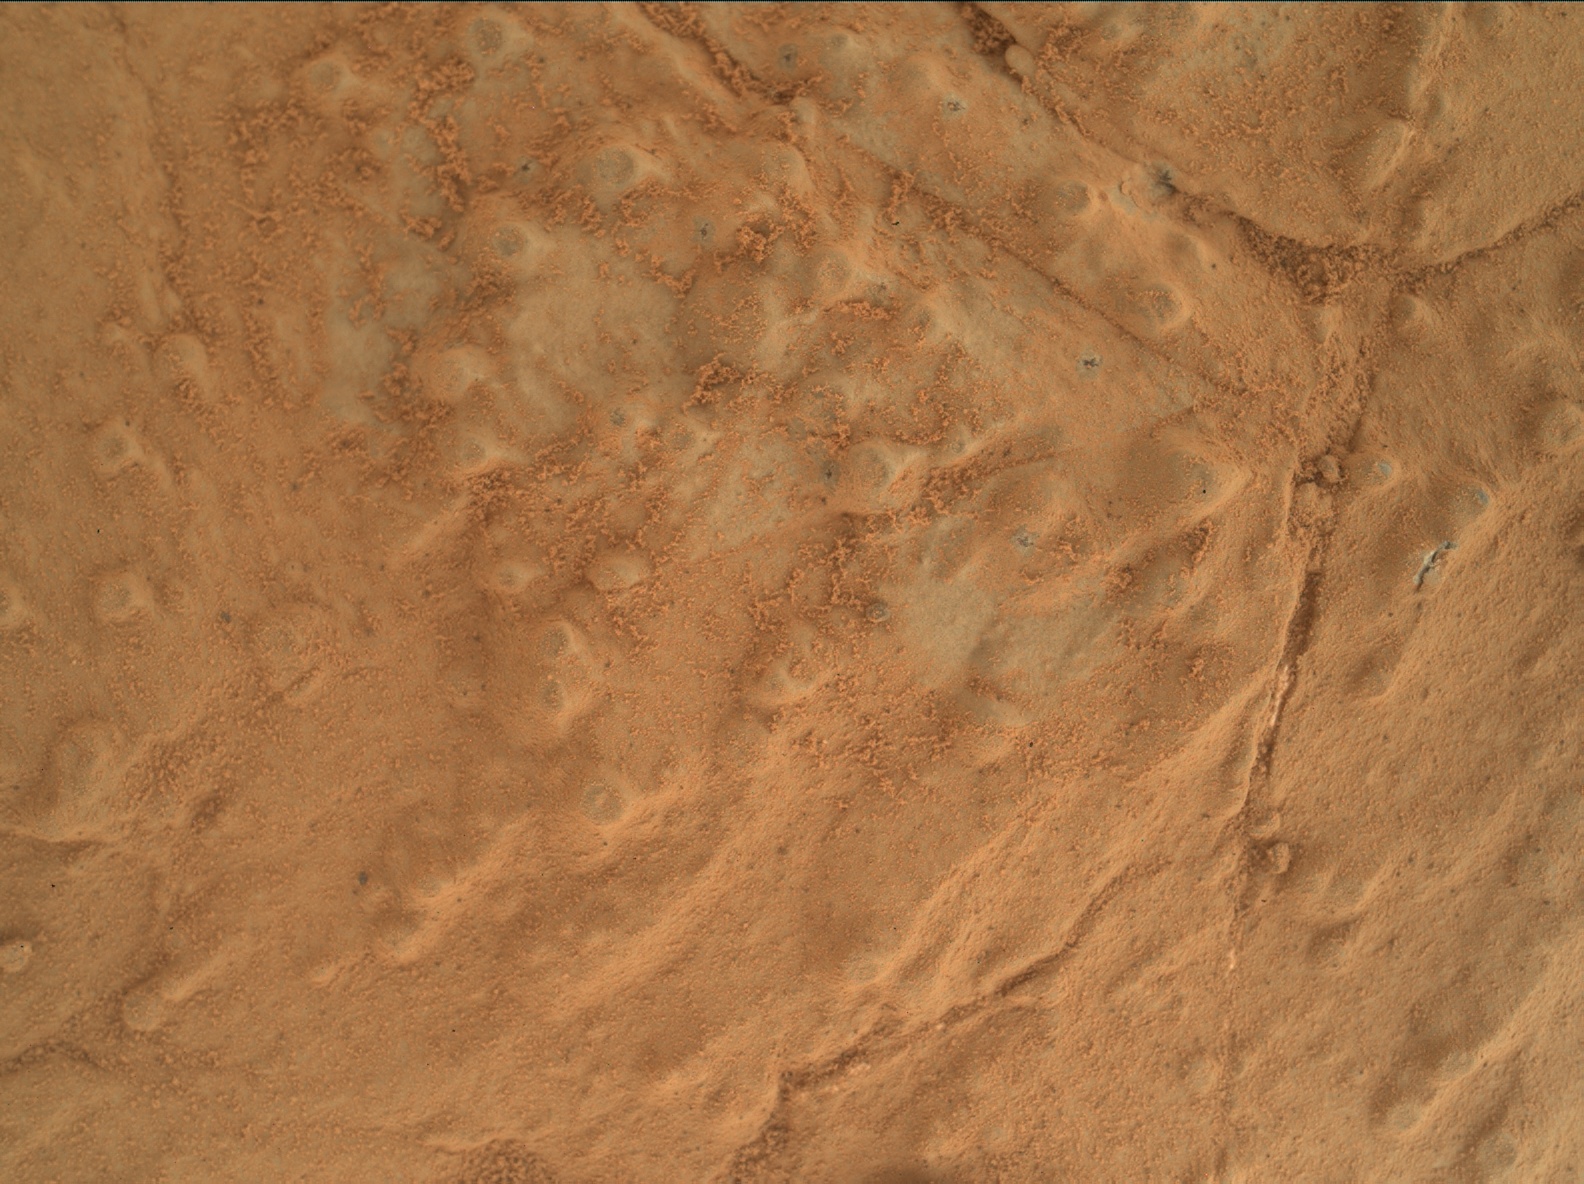 Nasa's Mars rover Curiosity acquired this image using its Mars Hand Lens Imager (MAHLI) on Sol 277